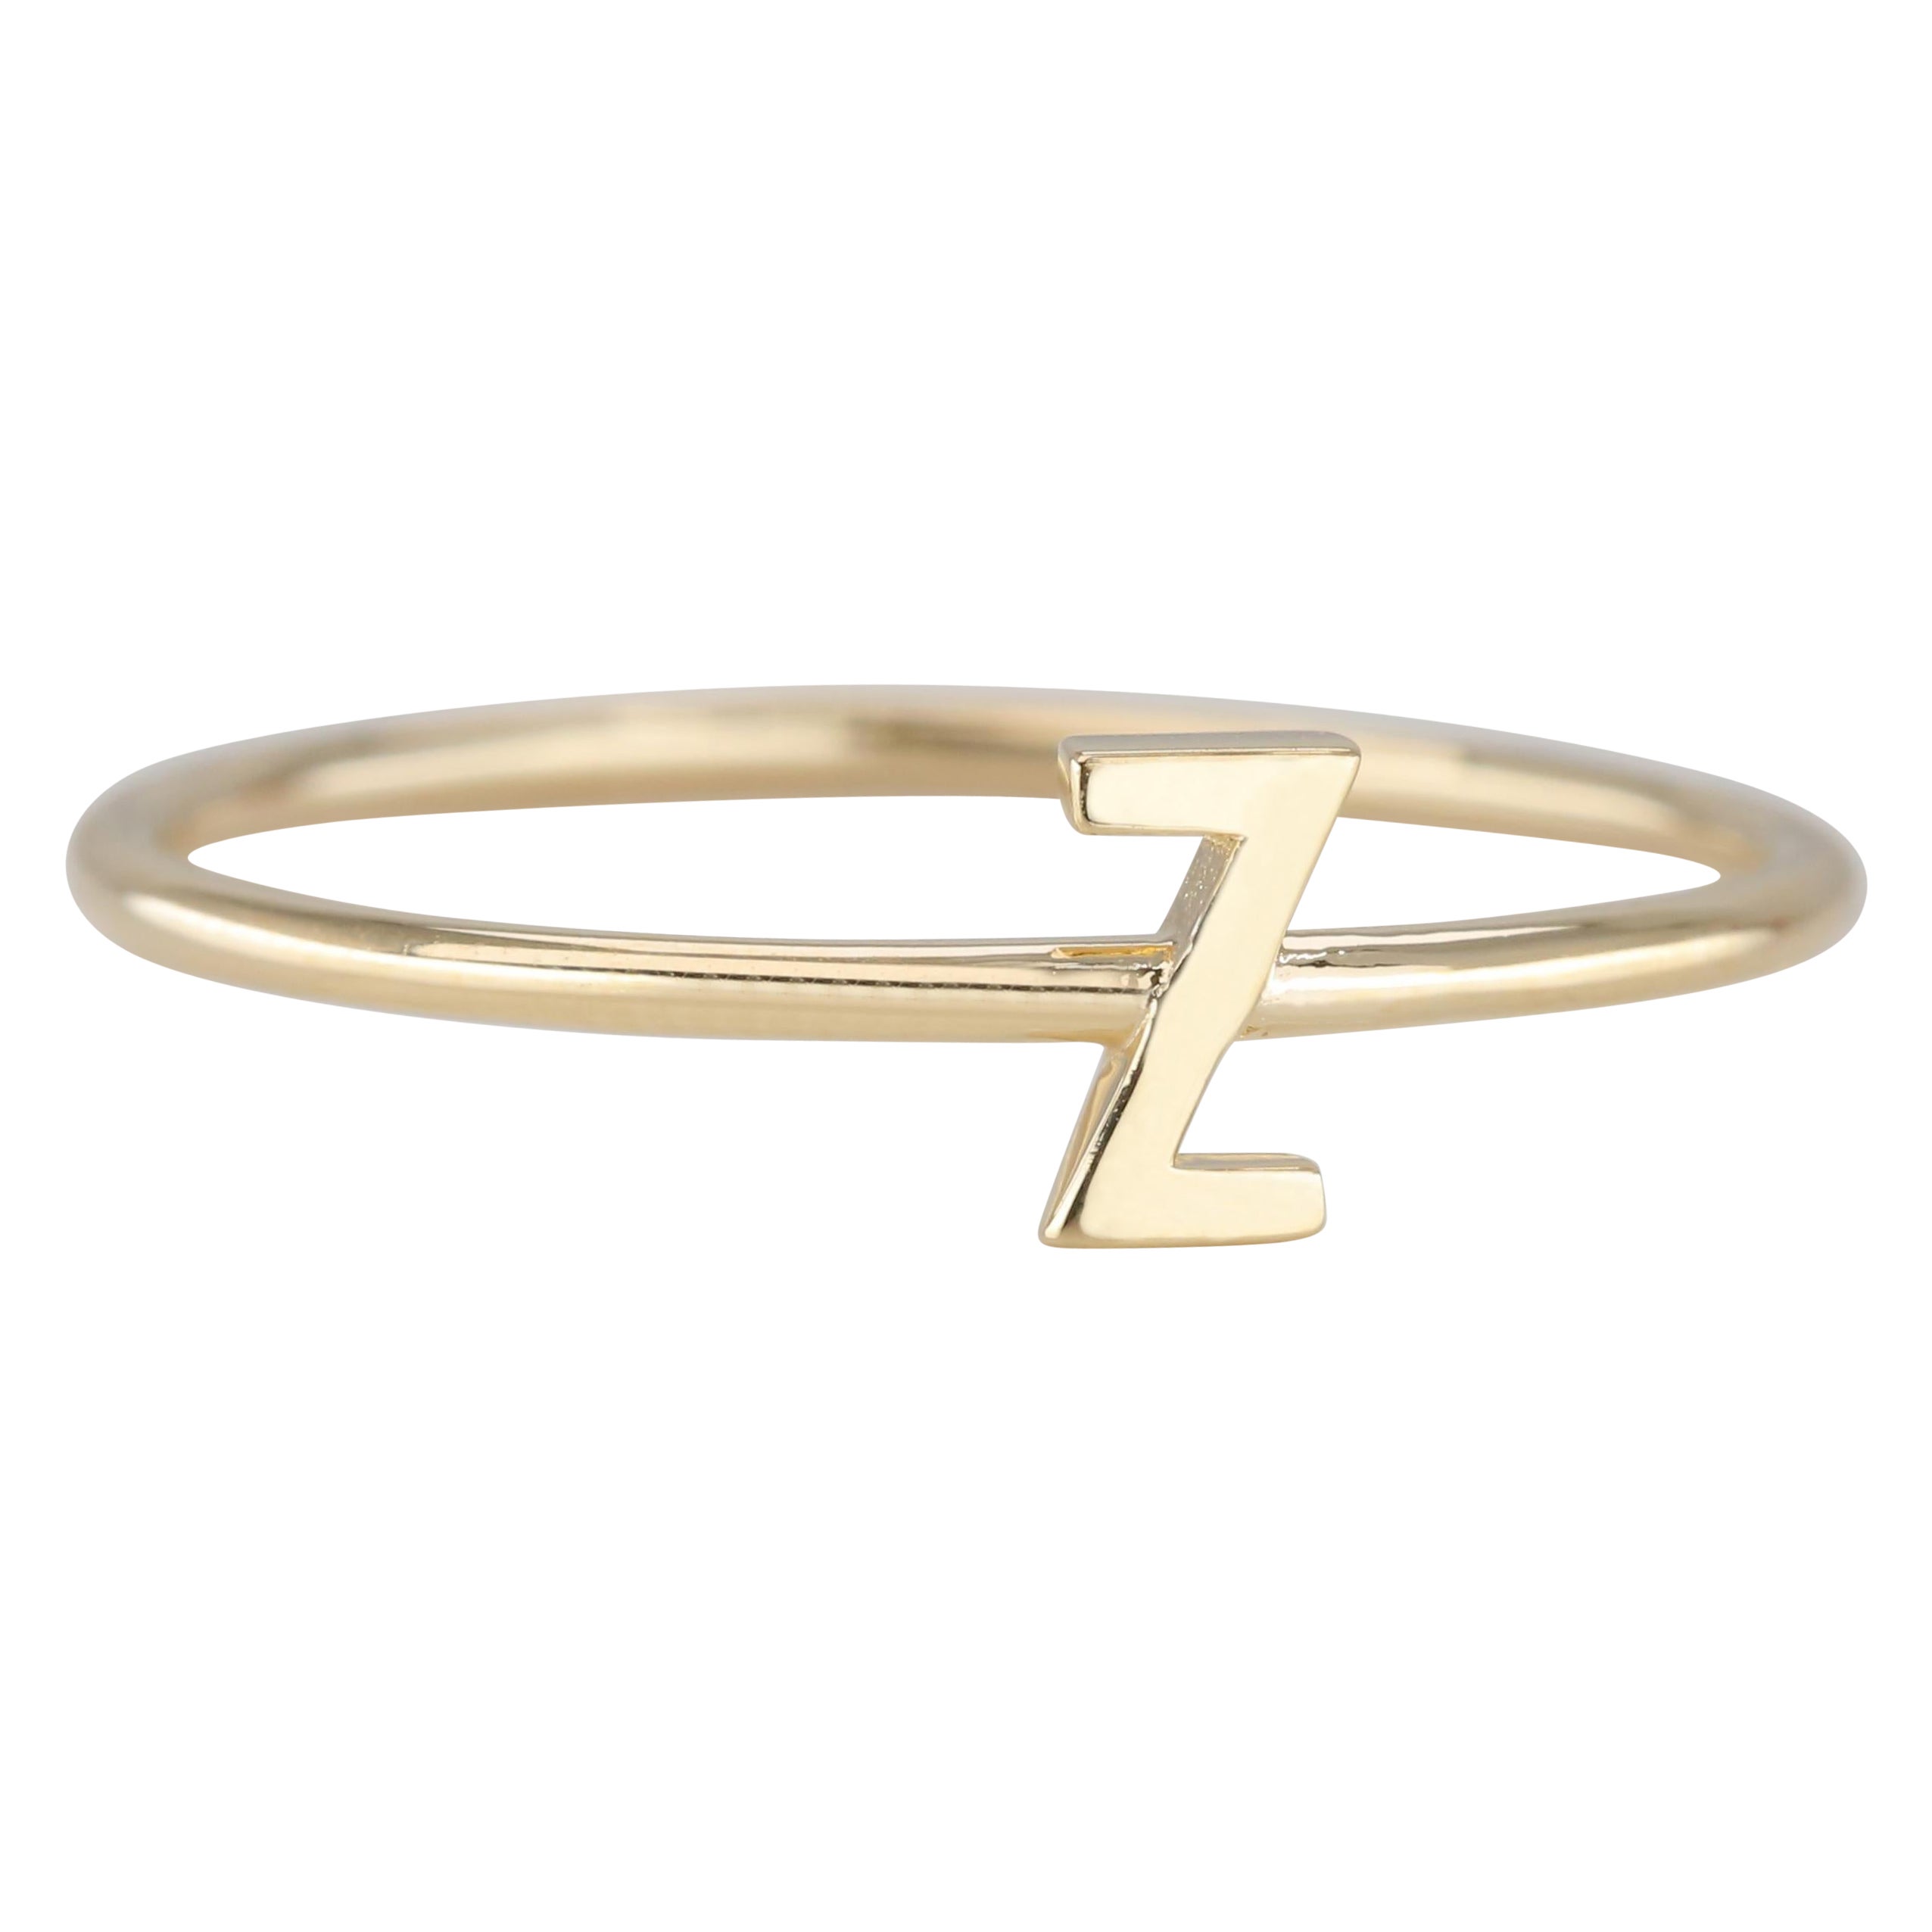 For Sale:  14K Gold Initial Z Letter Ring, Personalized Initial Letter Ring